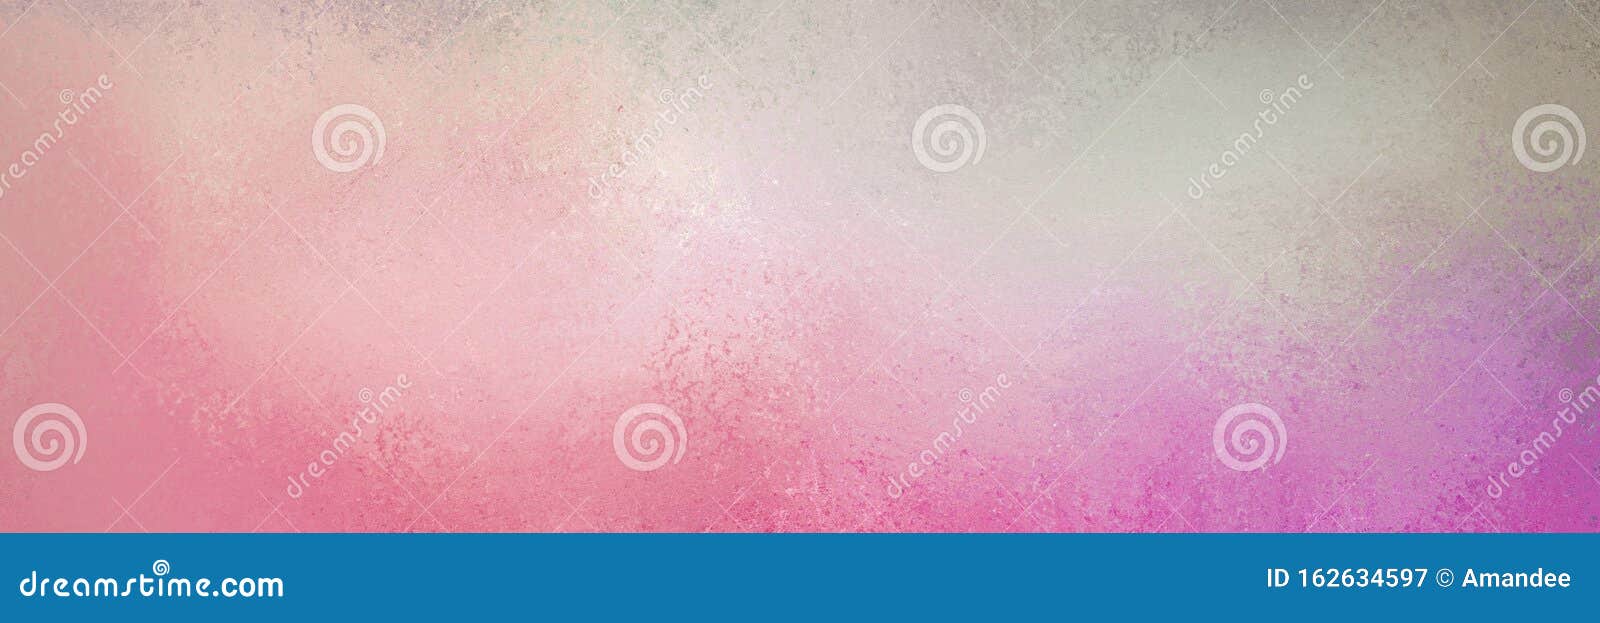 abstract colorful background in pastel colors with soft sponged grunge texture and cloudy sunrise or sunset sky colors of purple p